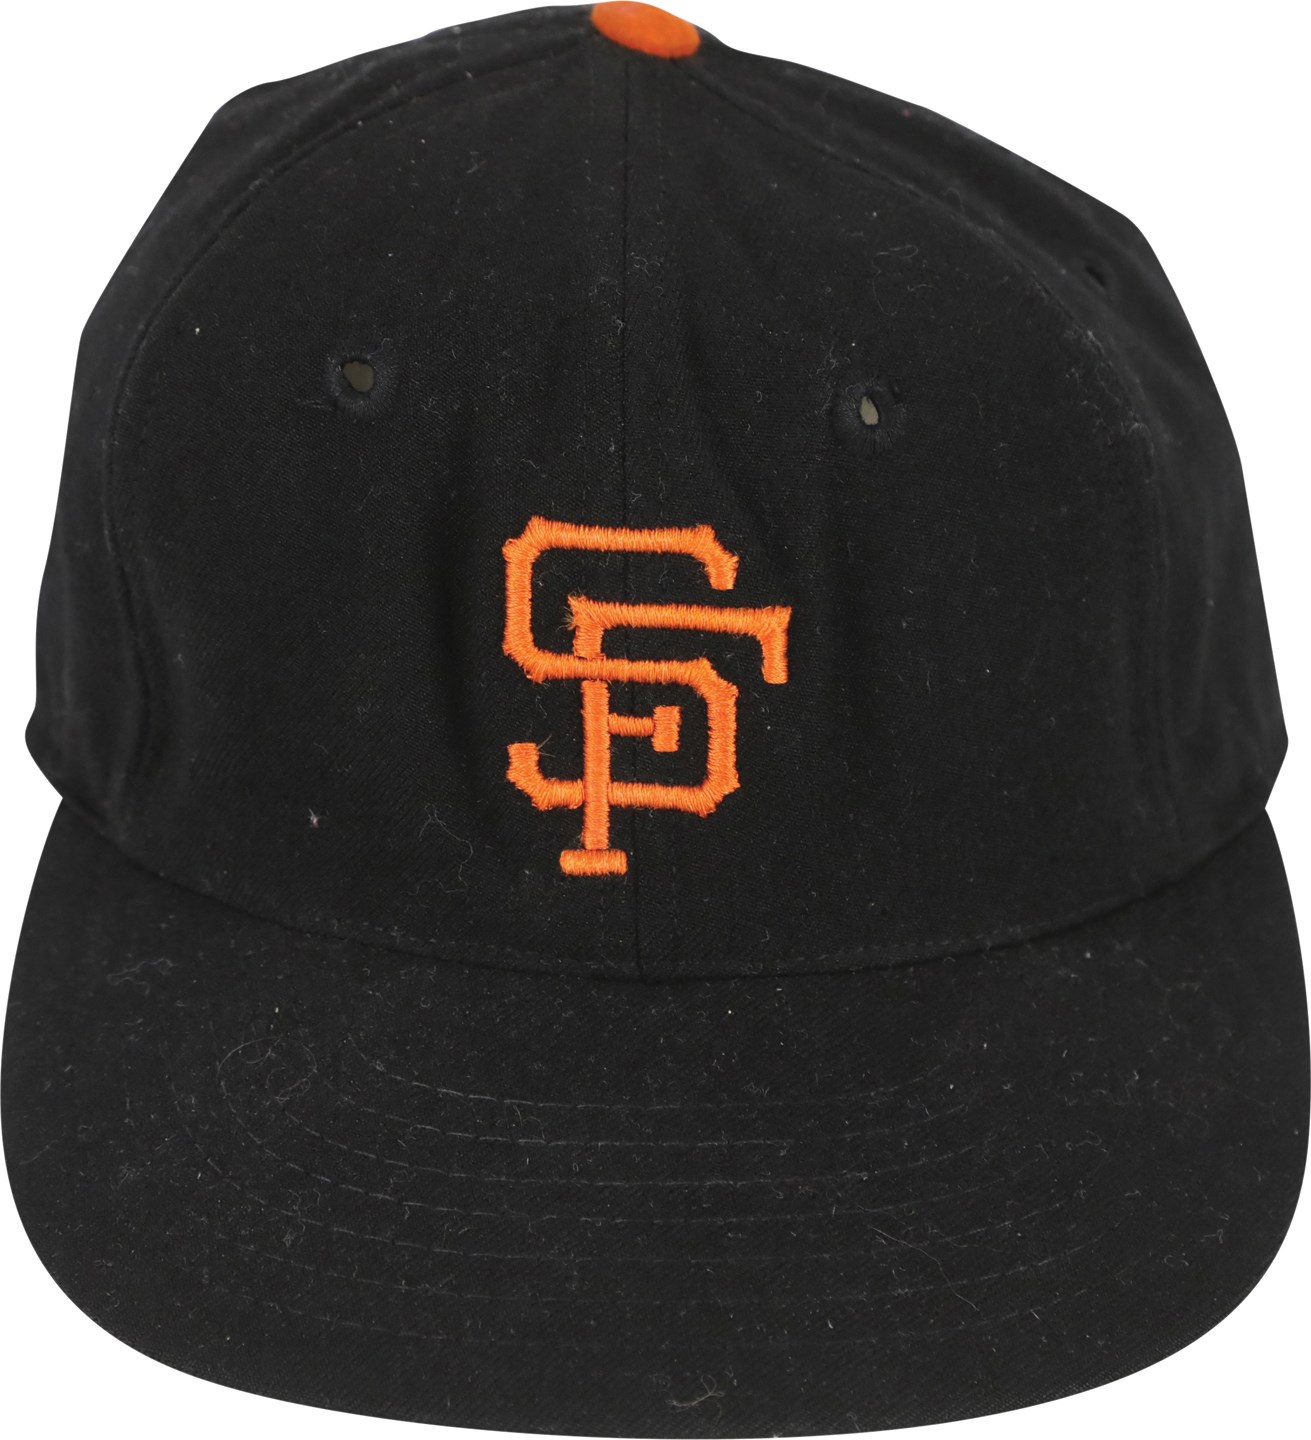 Baseball Equipment - 1960-67 San Francisco Giants Game Worn Hat Attributed to Willie Mays